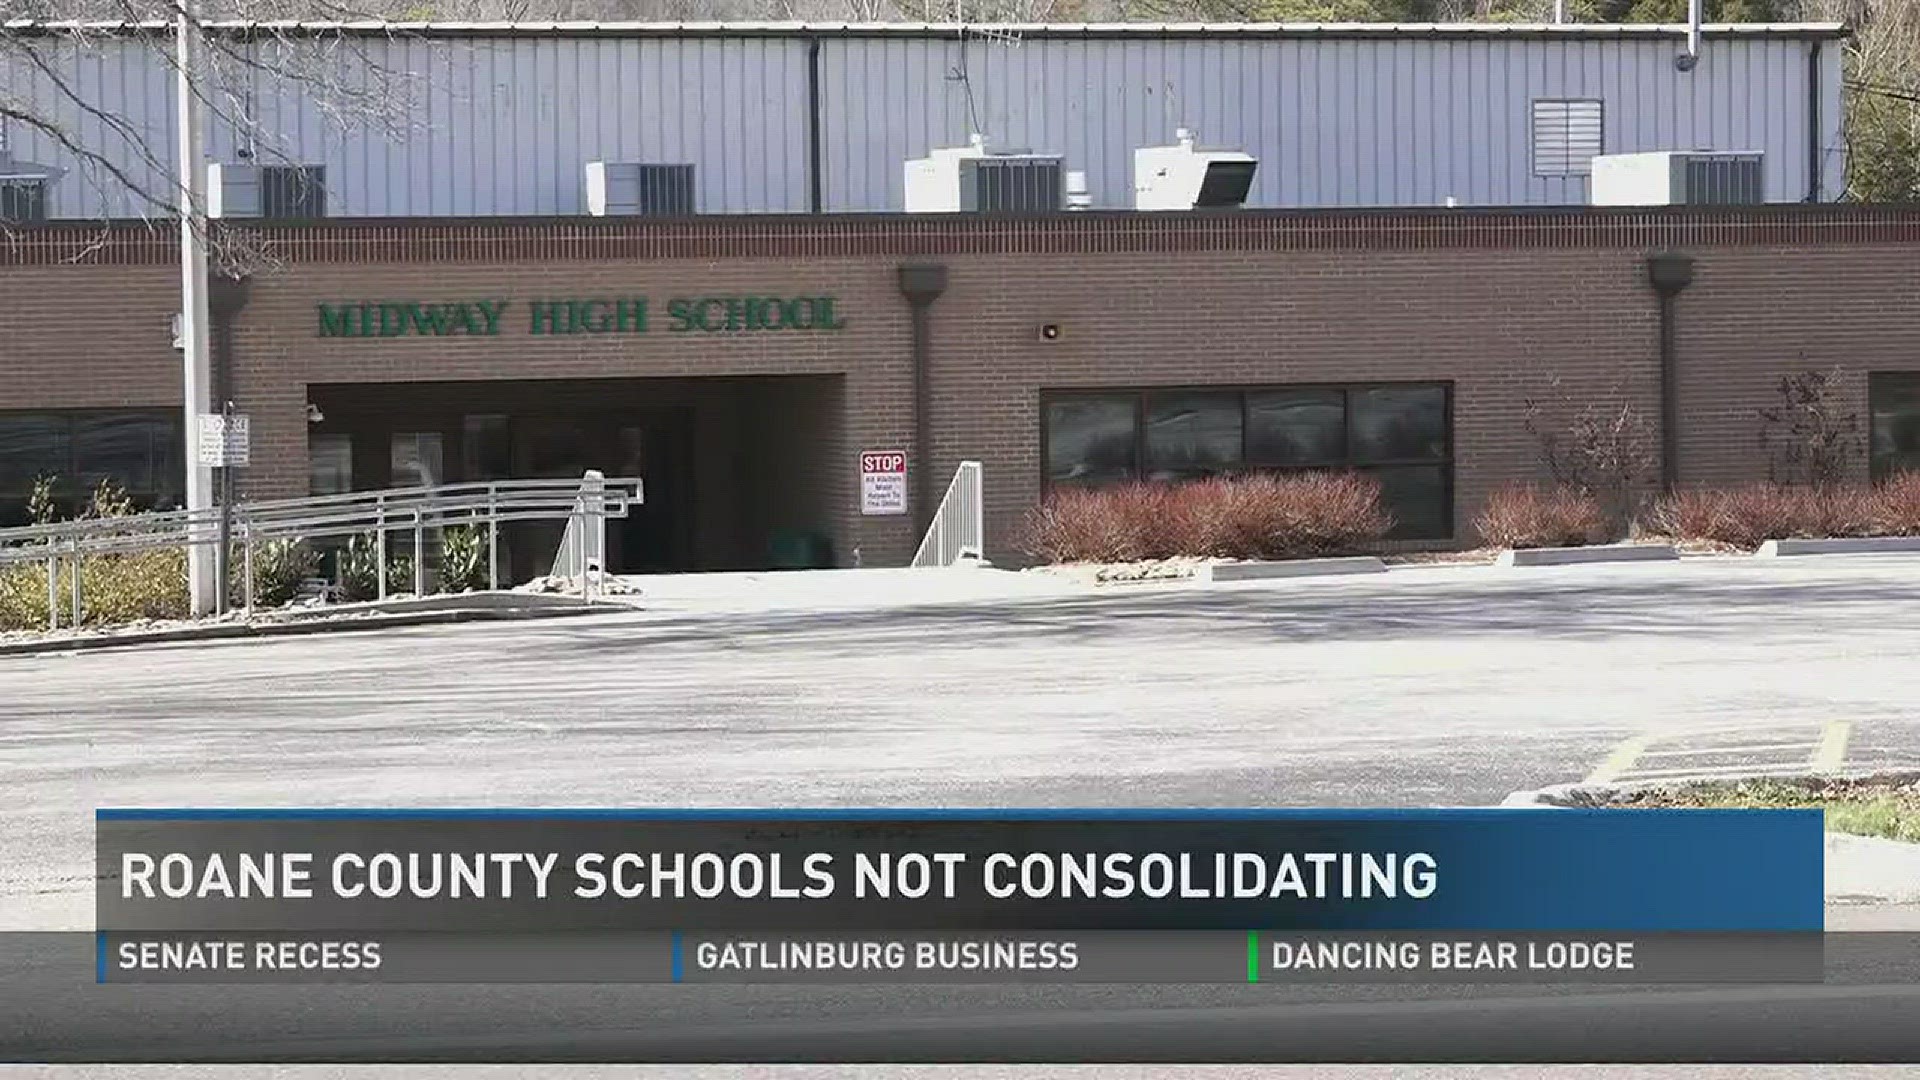 April 6, 2017: The Roane County Board of Education has decided against a plan to consolidate the county's five high schools into one school.